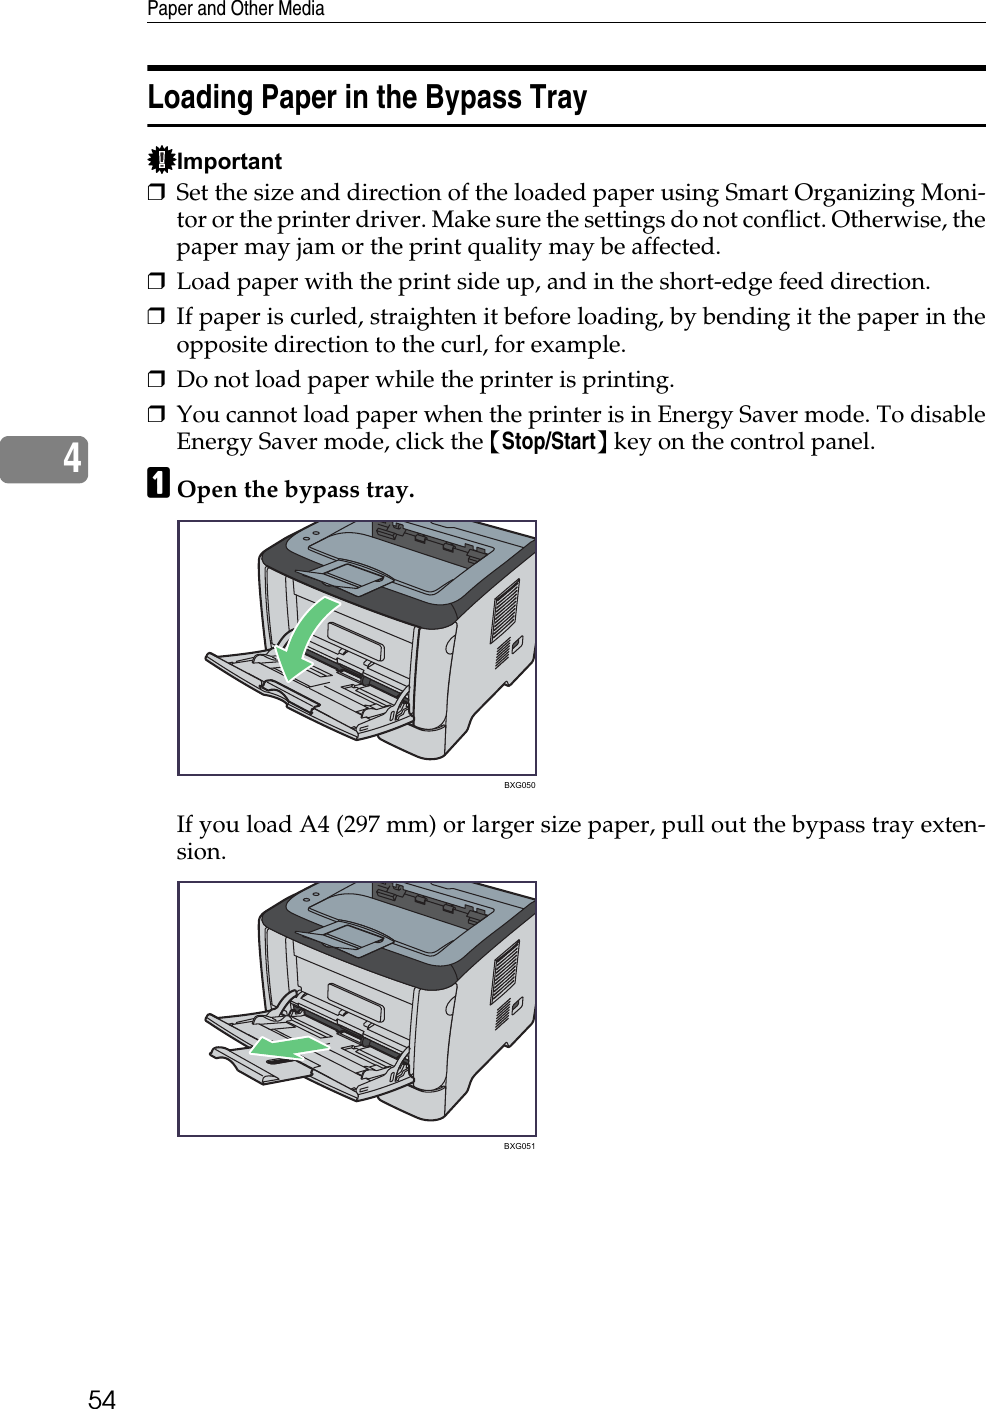 Paper and Other Media544Loading Paper in the Bypass TrayImportant❒Set the size and direction of the loaded paper using Smart Organizing Moni-tor or the printer driver. Make sure the settings do not conflict. Otherwise, thepaper may jam or the print quality may be affected.❒Load paper with the print side up, and in the short-edge feed direction.❒If paper is curled, straighten it before loading, by bending it the paper in theopposite direction to the curl, for example.❒Do not load paper while the printer is printing.❒You cannot load paper when the printer is in Energy Saver mode. To disableEnergy Saver mode, click the {Stop/Start} key on the control panel.AOpen the bypass tray.If you load A4 (297 mm) or larger size paper, pull out the bypass tray exten-sion.BXG050BXG051